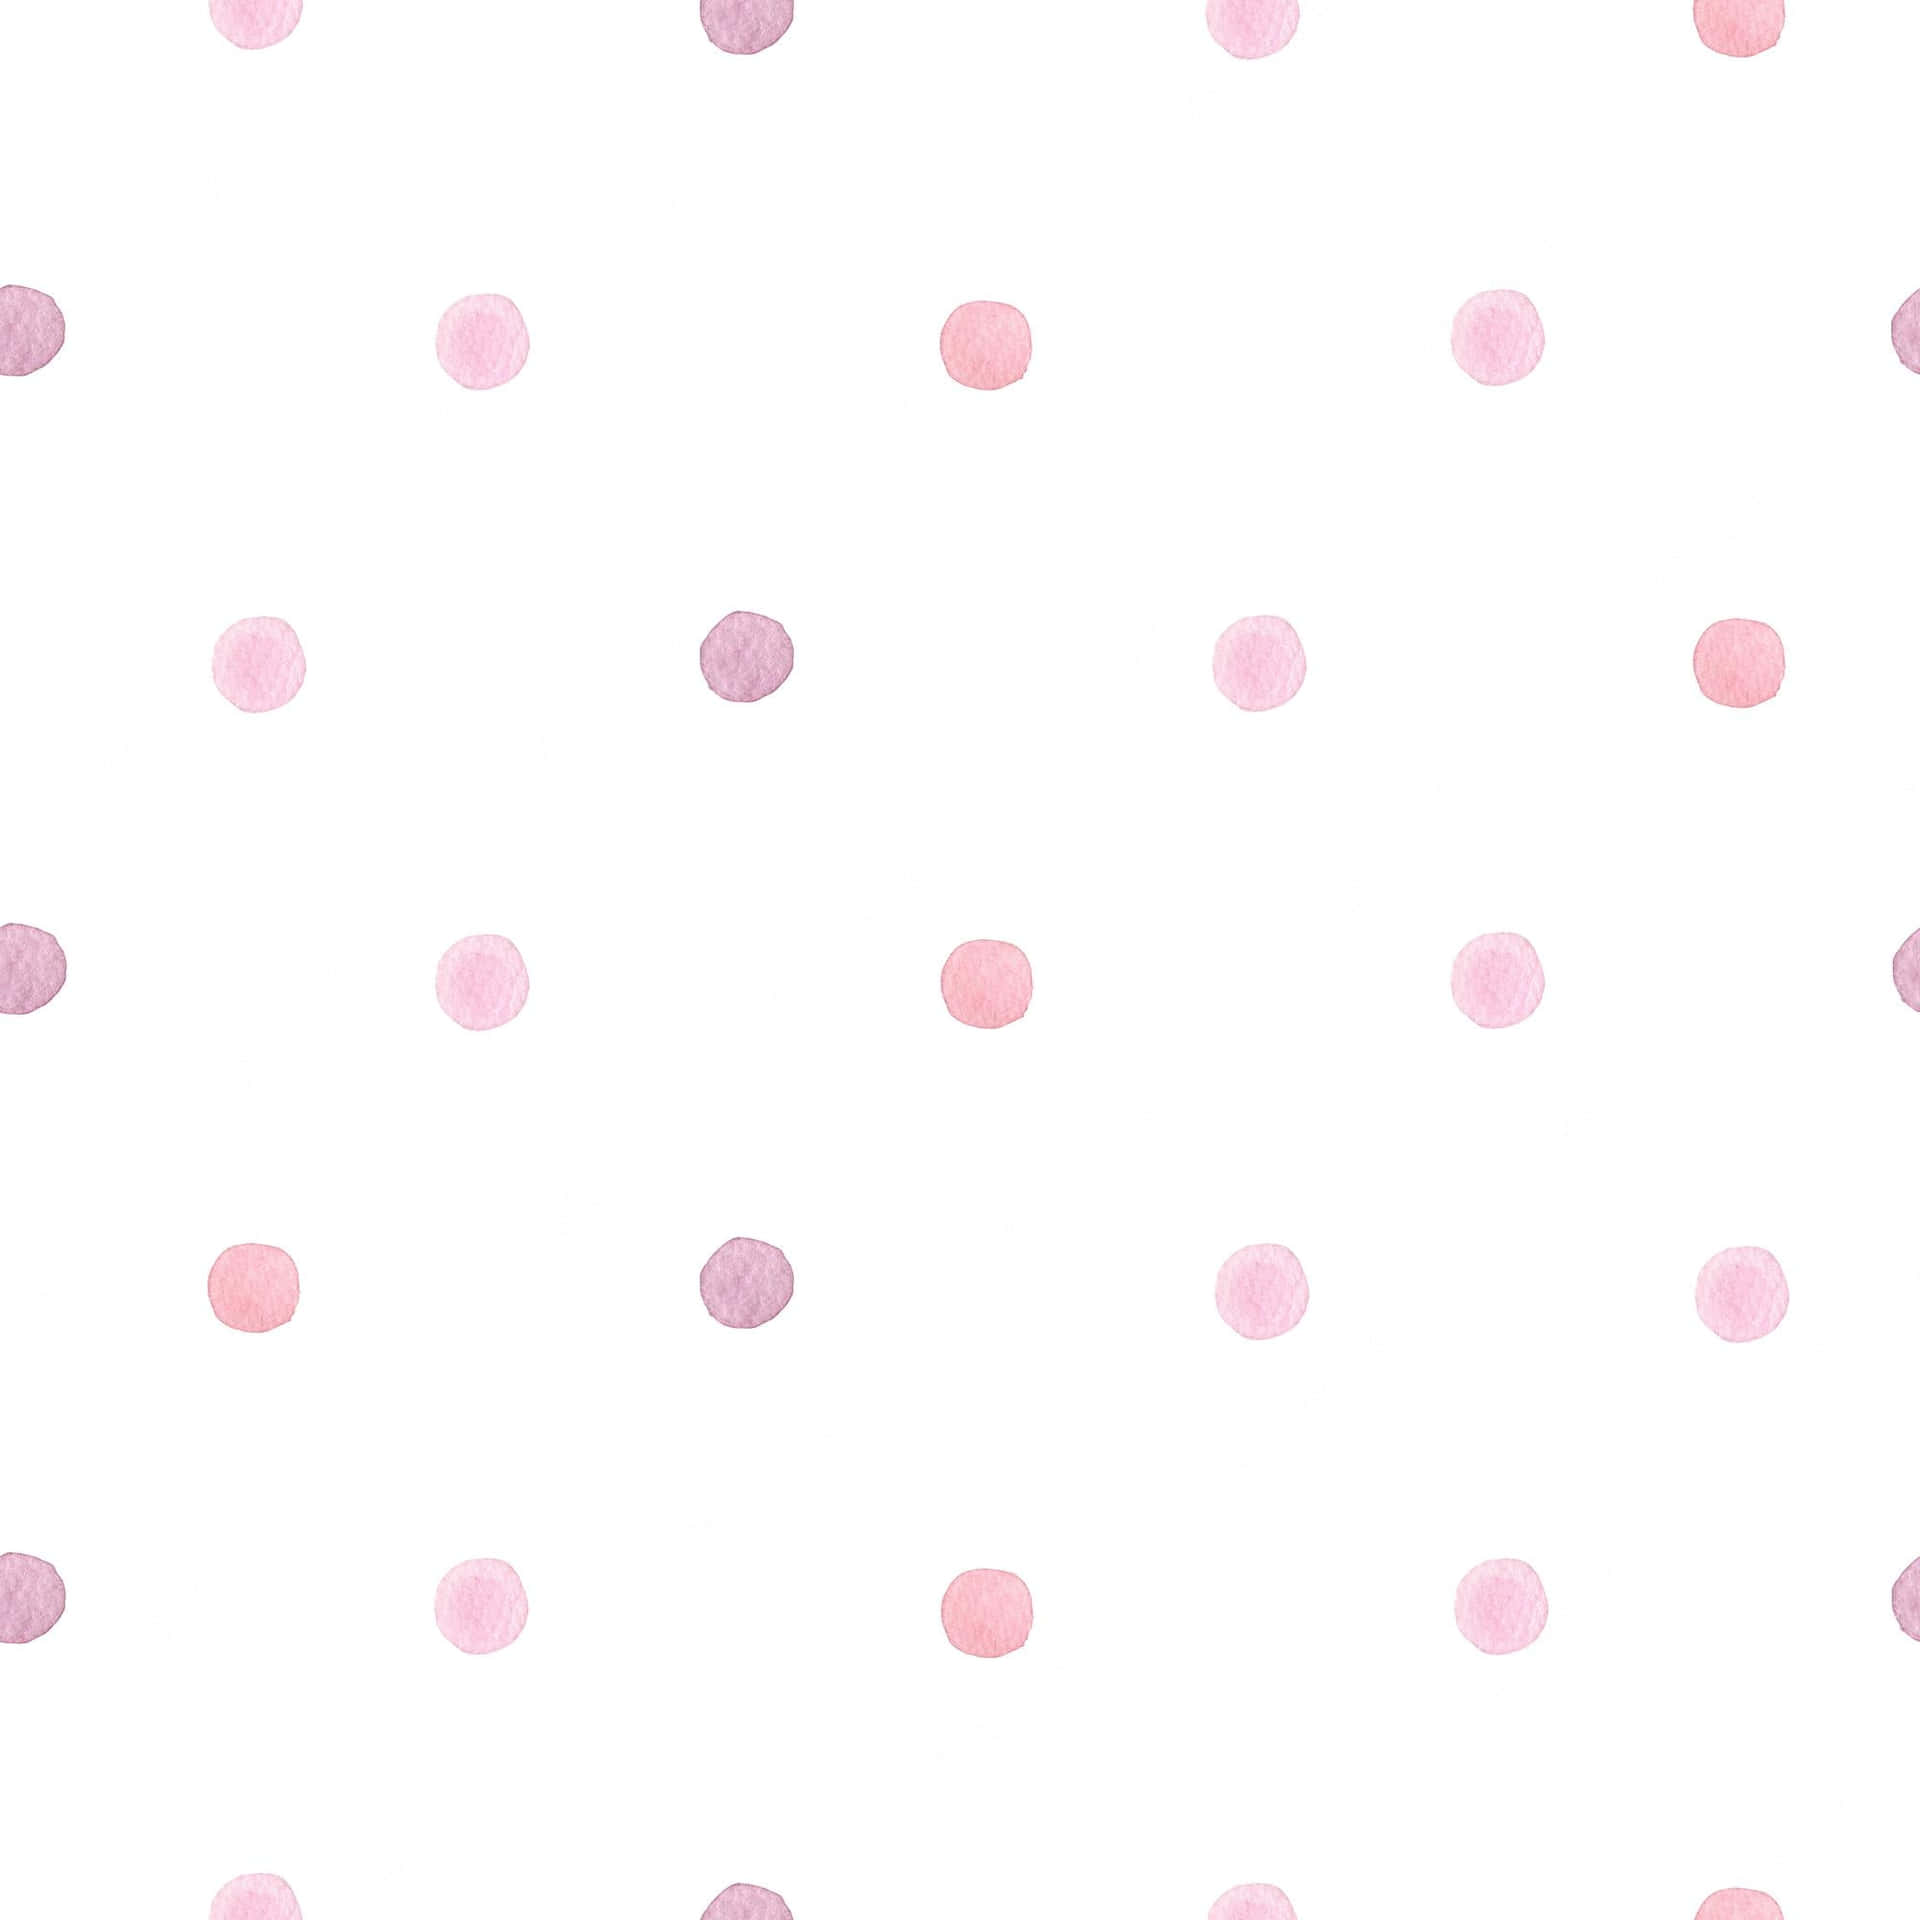 Soft and feminine pink and white polka dots Wallpaper